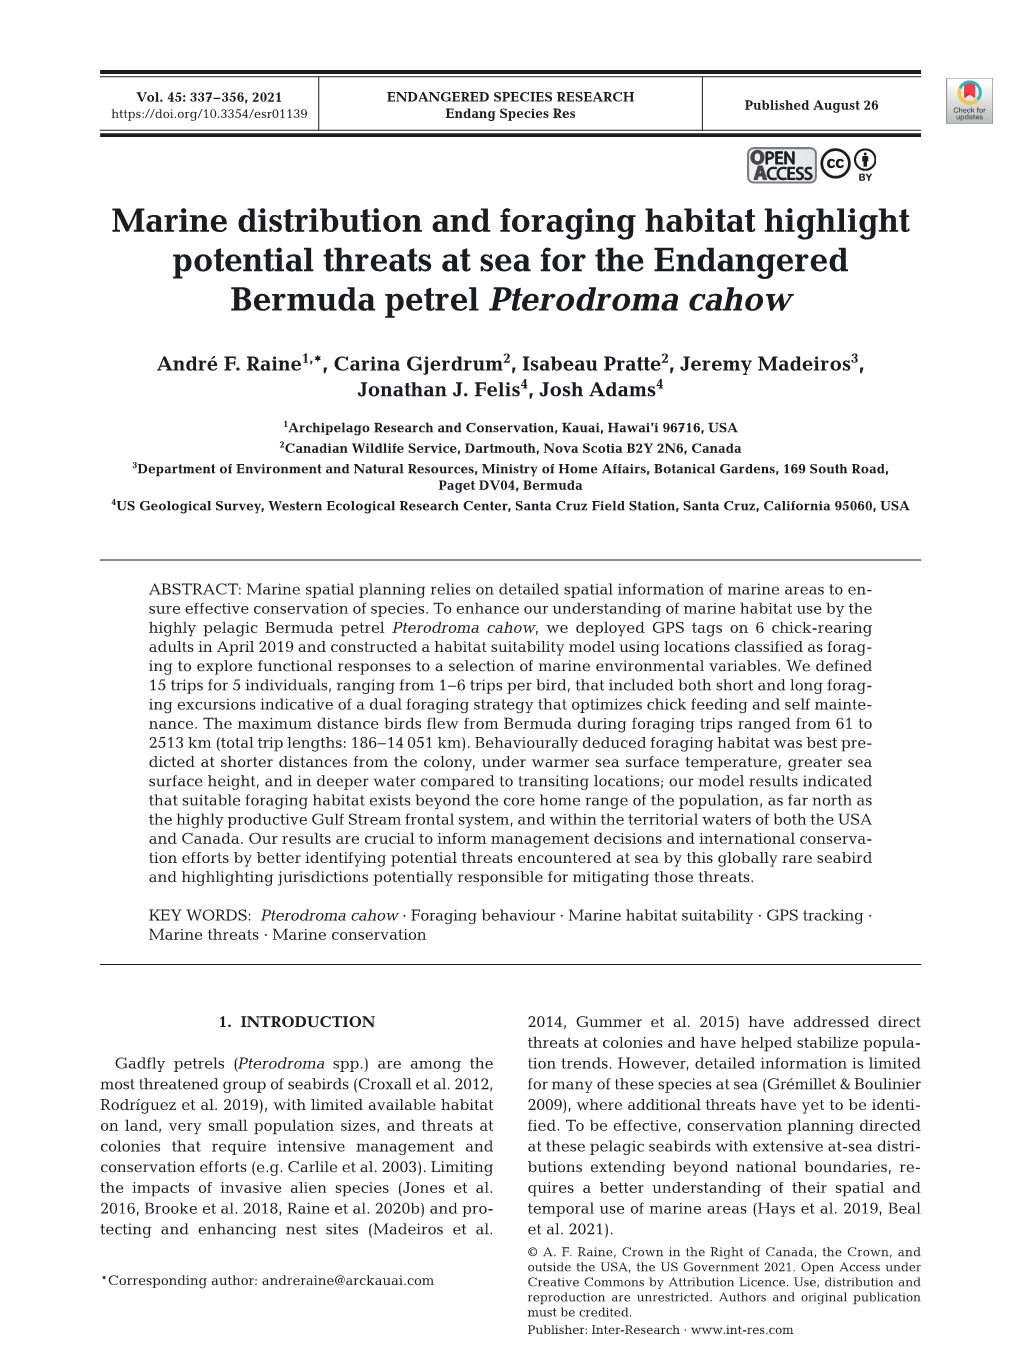 Marine Distribution and Foraging Habitat Highlight Potential Threats at Sea for the Endangered Bermuda Petrel Pterodroma Cahow